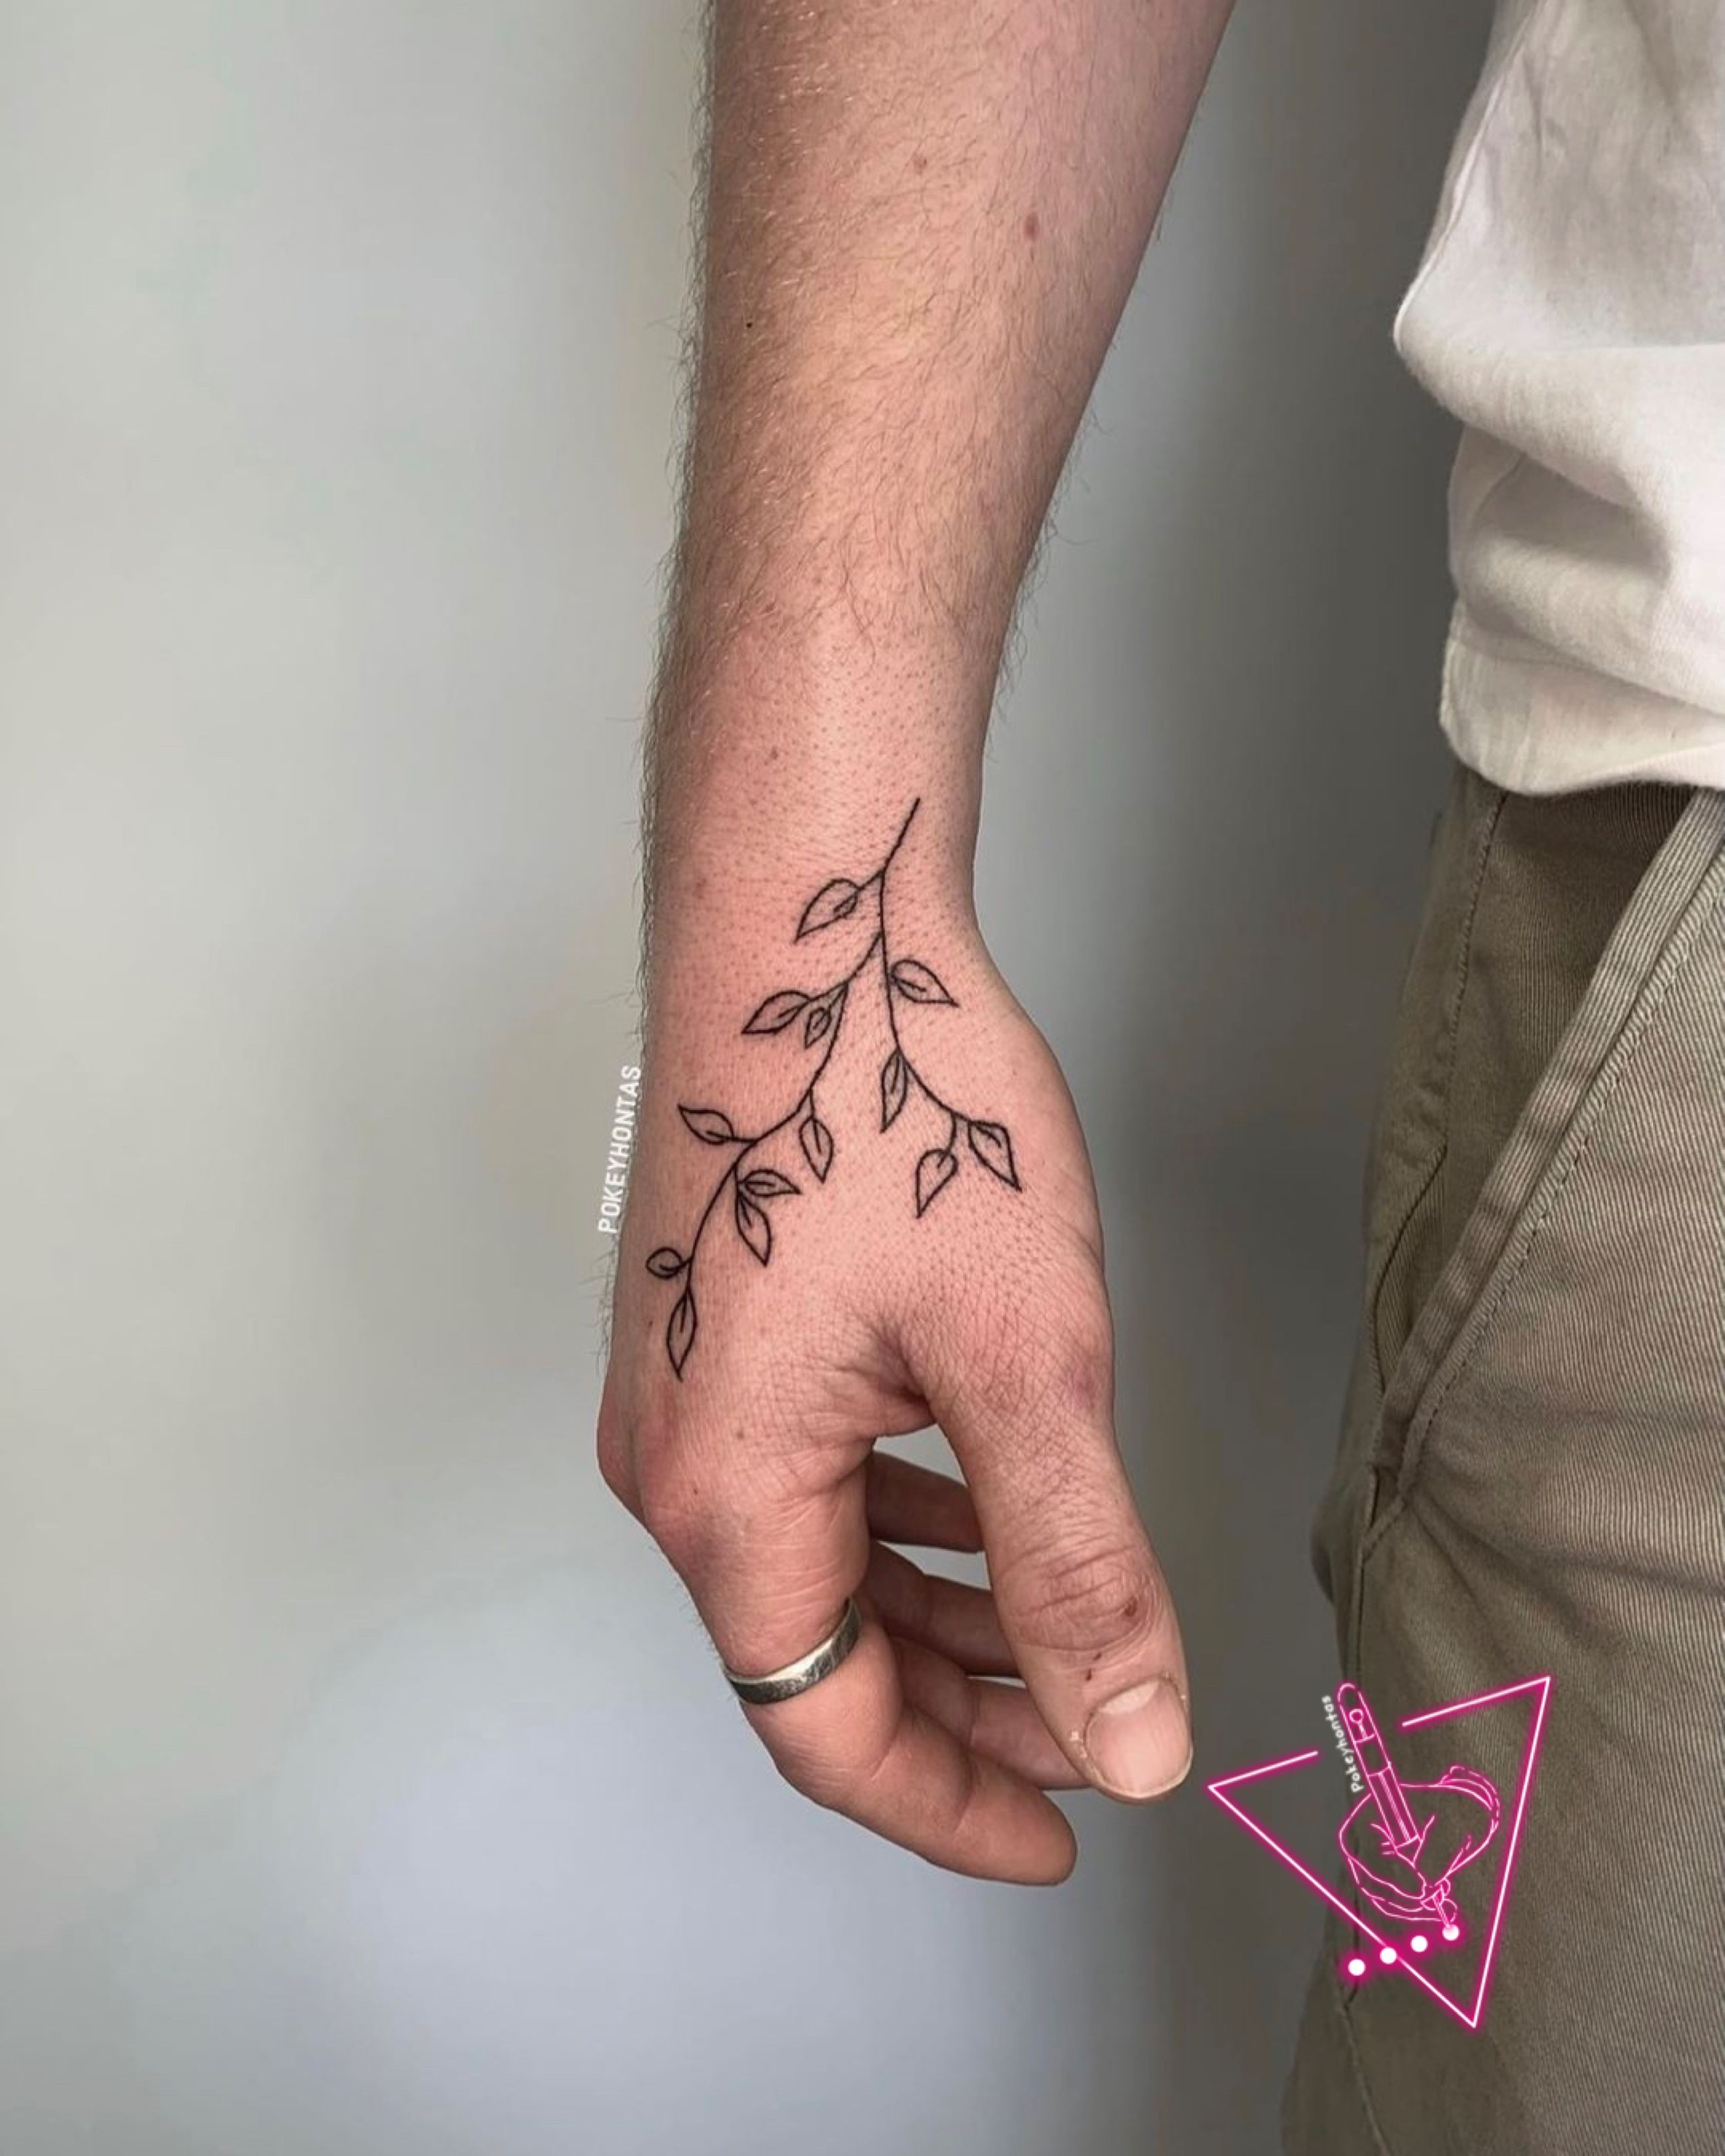 Tattoo uploaded by KTREW Tattoo • Hand-Poked Leaf Vine Tattoo on hand. Done  by Pokeyhontas at KTREW Tattoo, Birmingham UK #handtattoo #handpoked  #handpoke #tattoo #leafvine #vinegattoo • Tattoodo